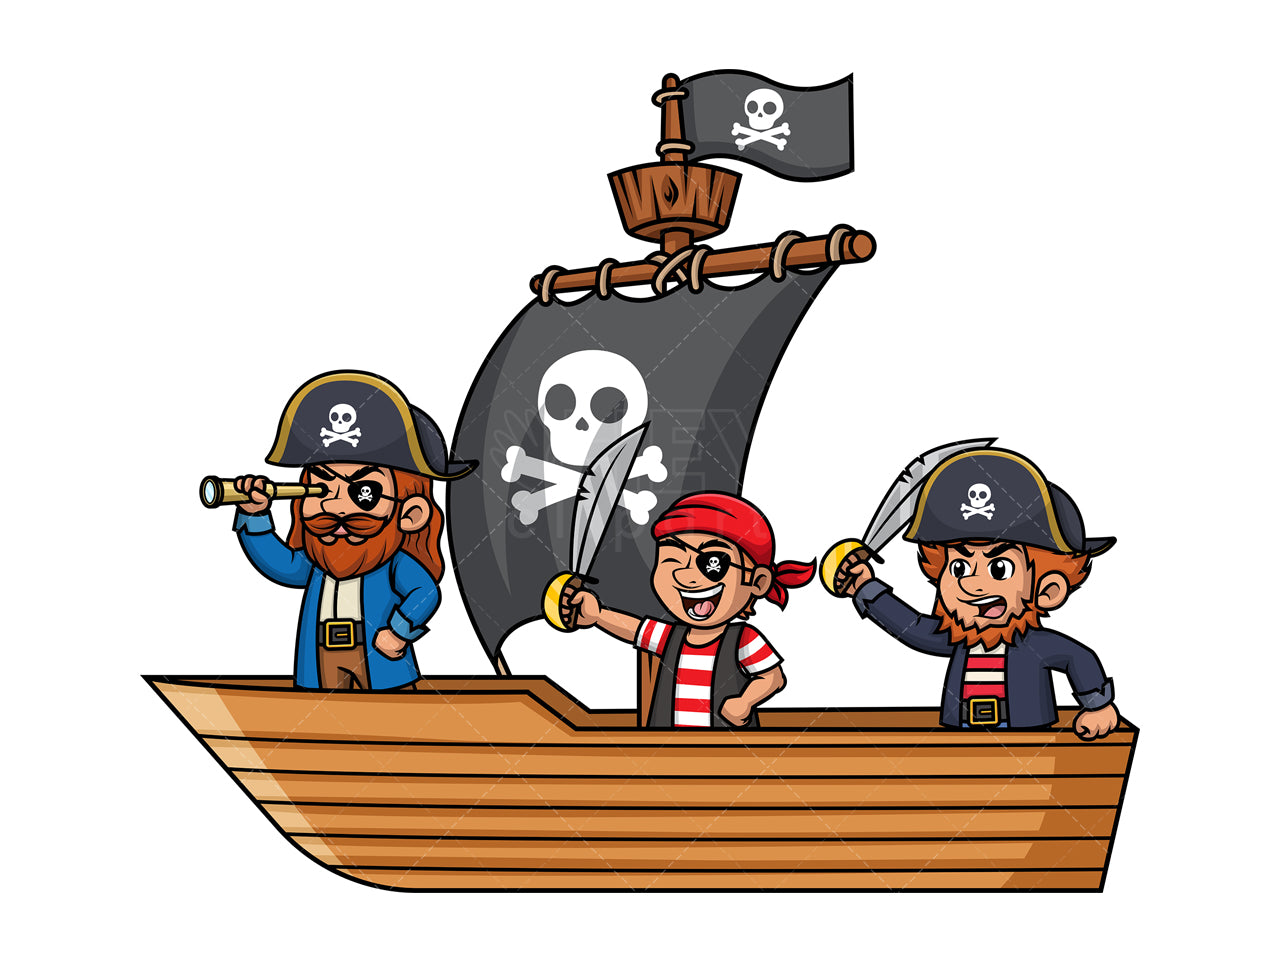 Royalty-free stock vector illustration of  a pirate crew aboard a ship with black sails.